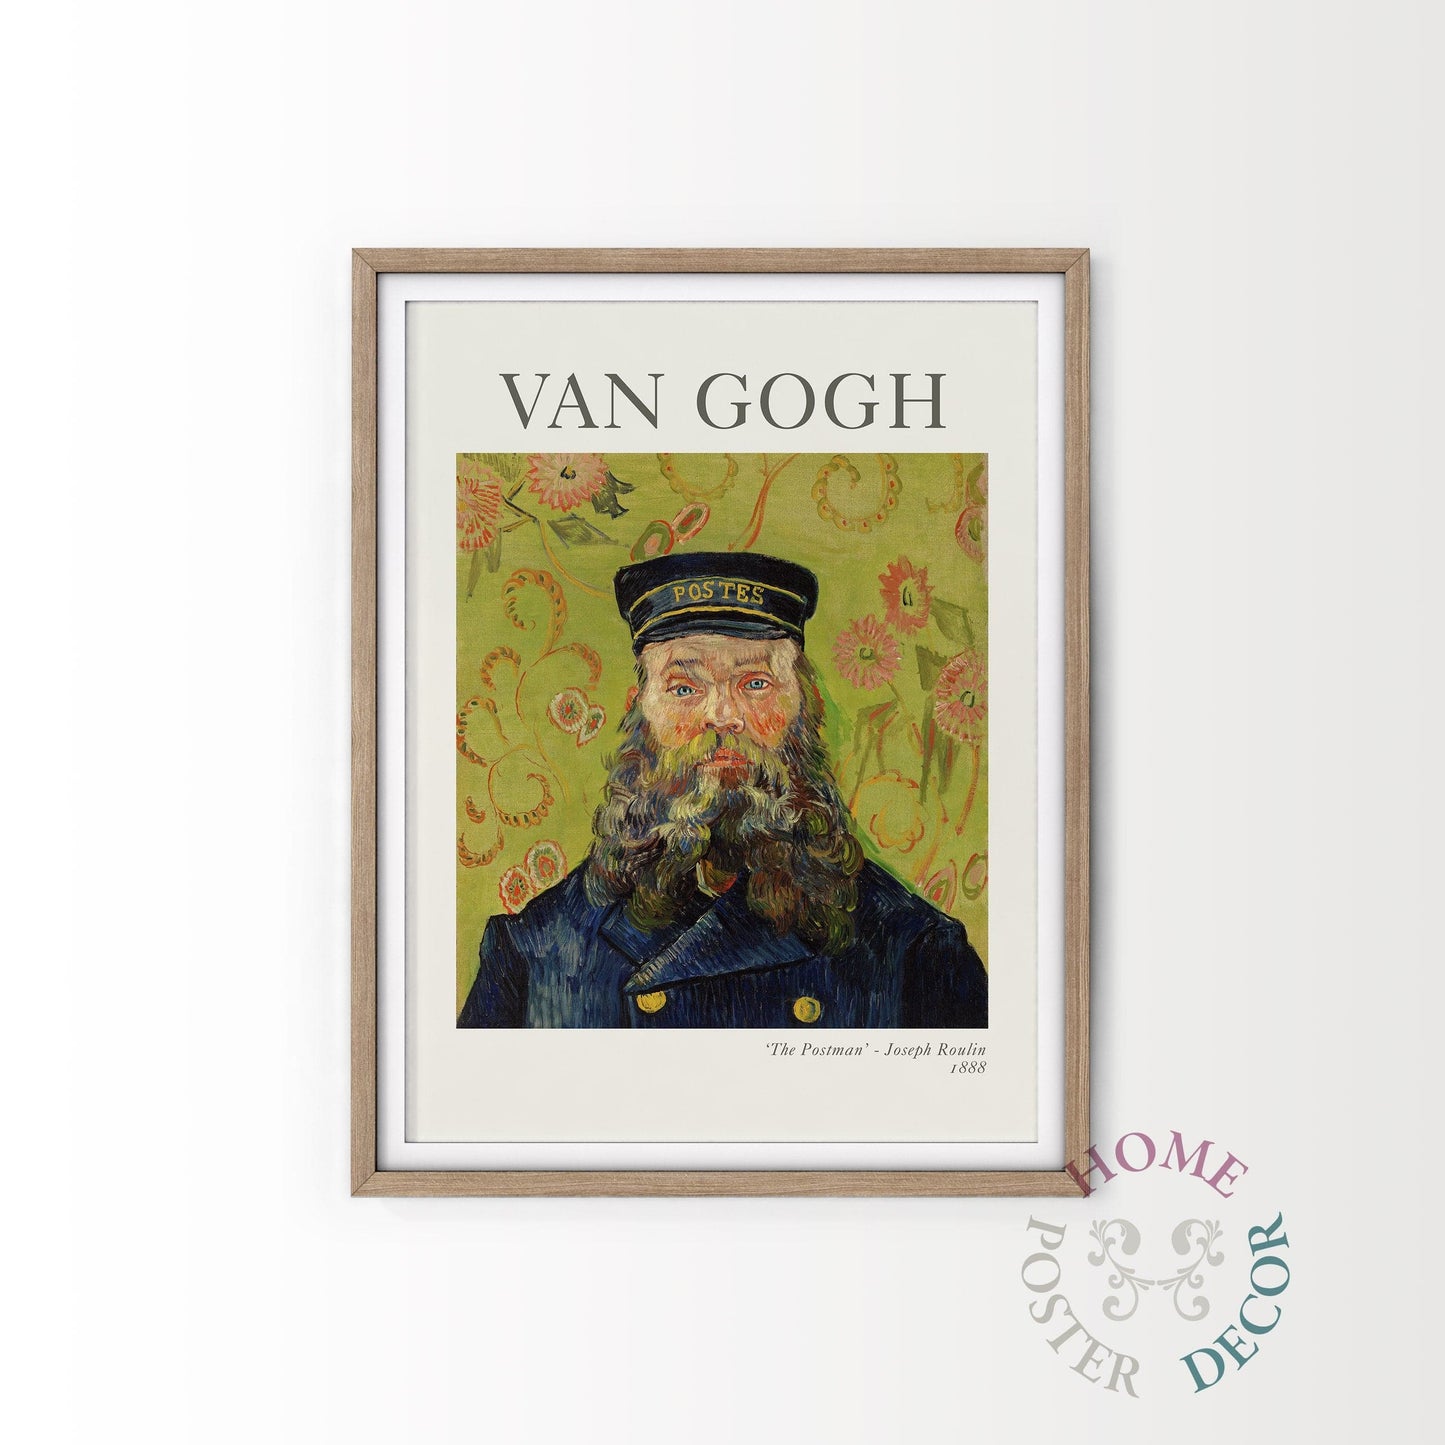 Home Poster Decor Van Gogh Poster, Van Gogh Painting, Reproduction Van Gogh, Classic Painting, Post-impressionist Painter, The Postman